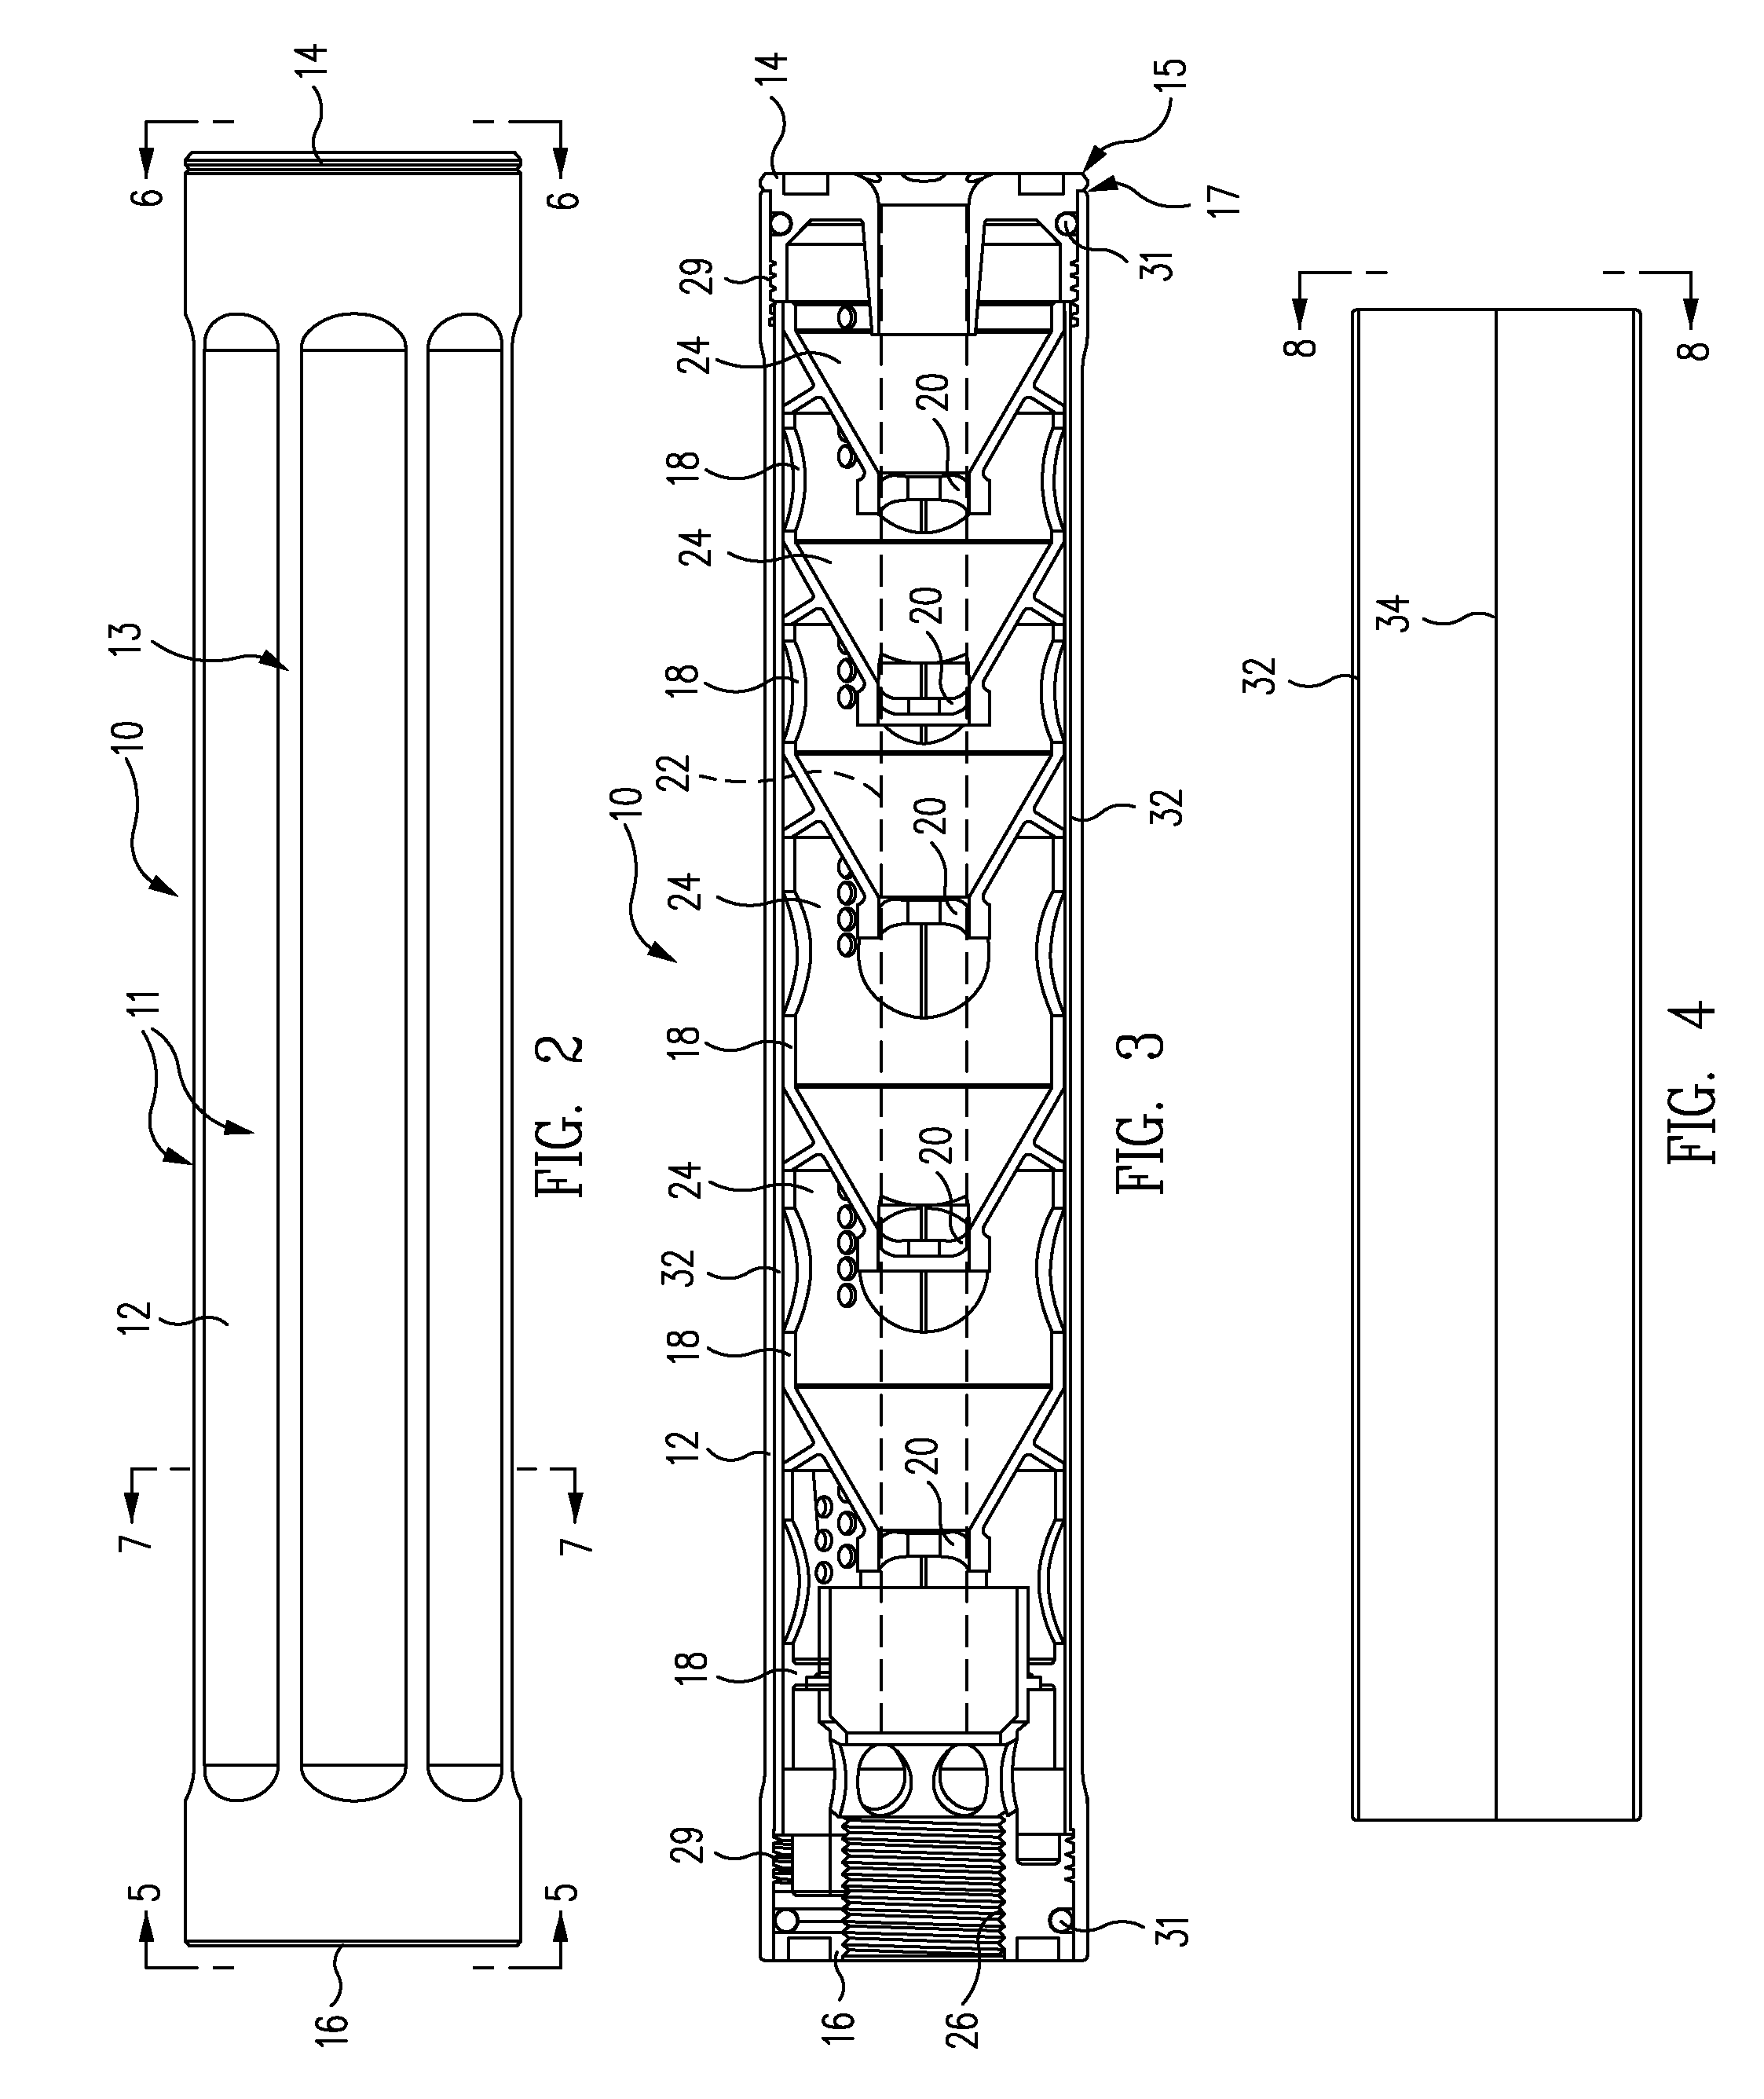 Firearm sound suppressor with flanged back end